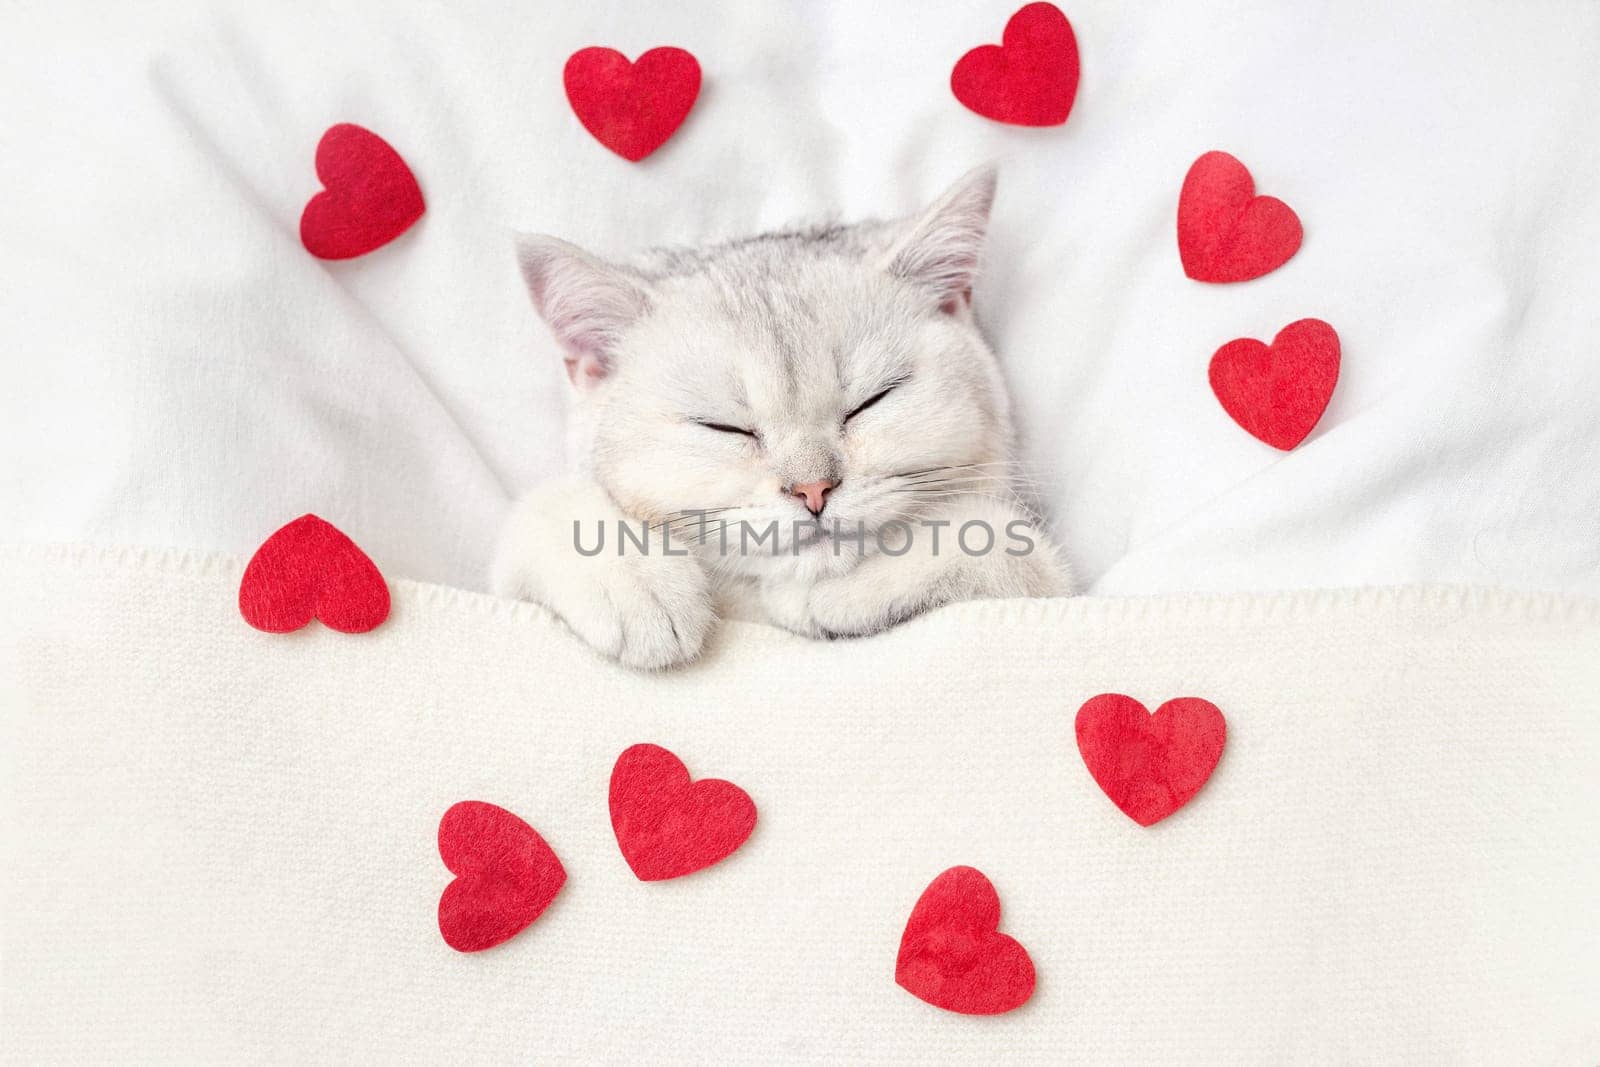 A cute white kitten sleeps on a white bed under a knitted blanket with scattered red hearts. View from above. Copy space